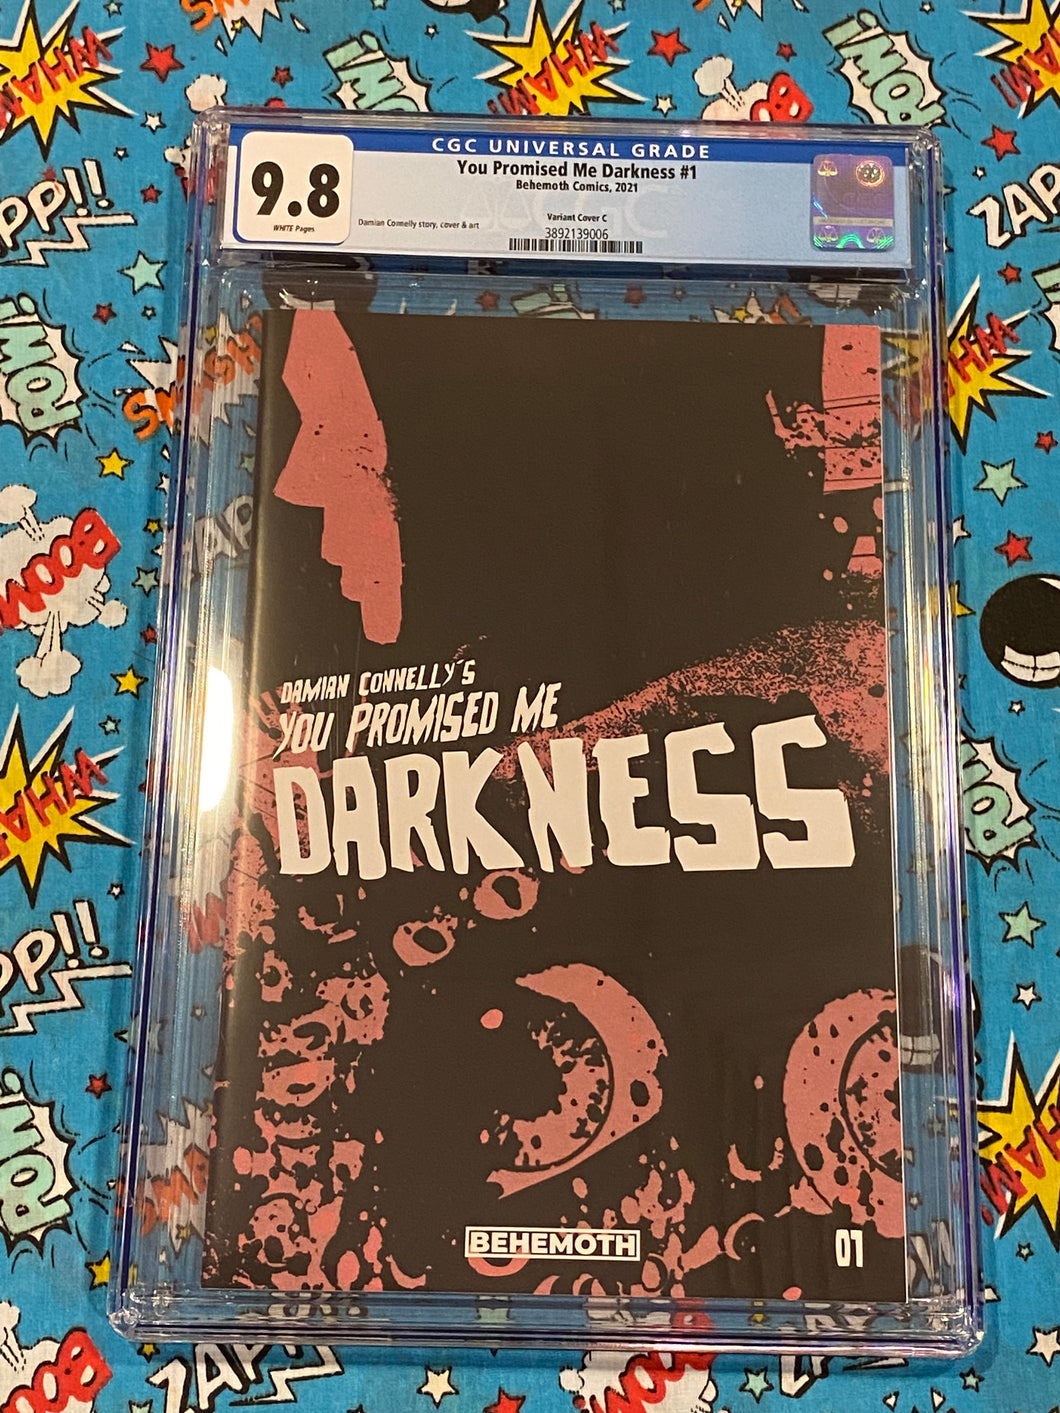 CGC 9.8 - You Promised Me Darkness #1 - Variant C - Damian Connelly Story & Art